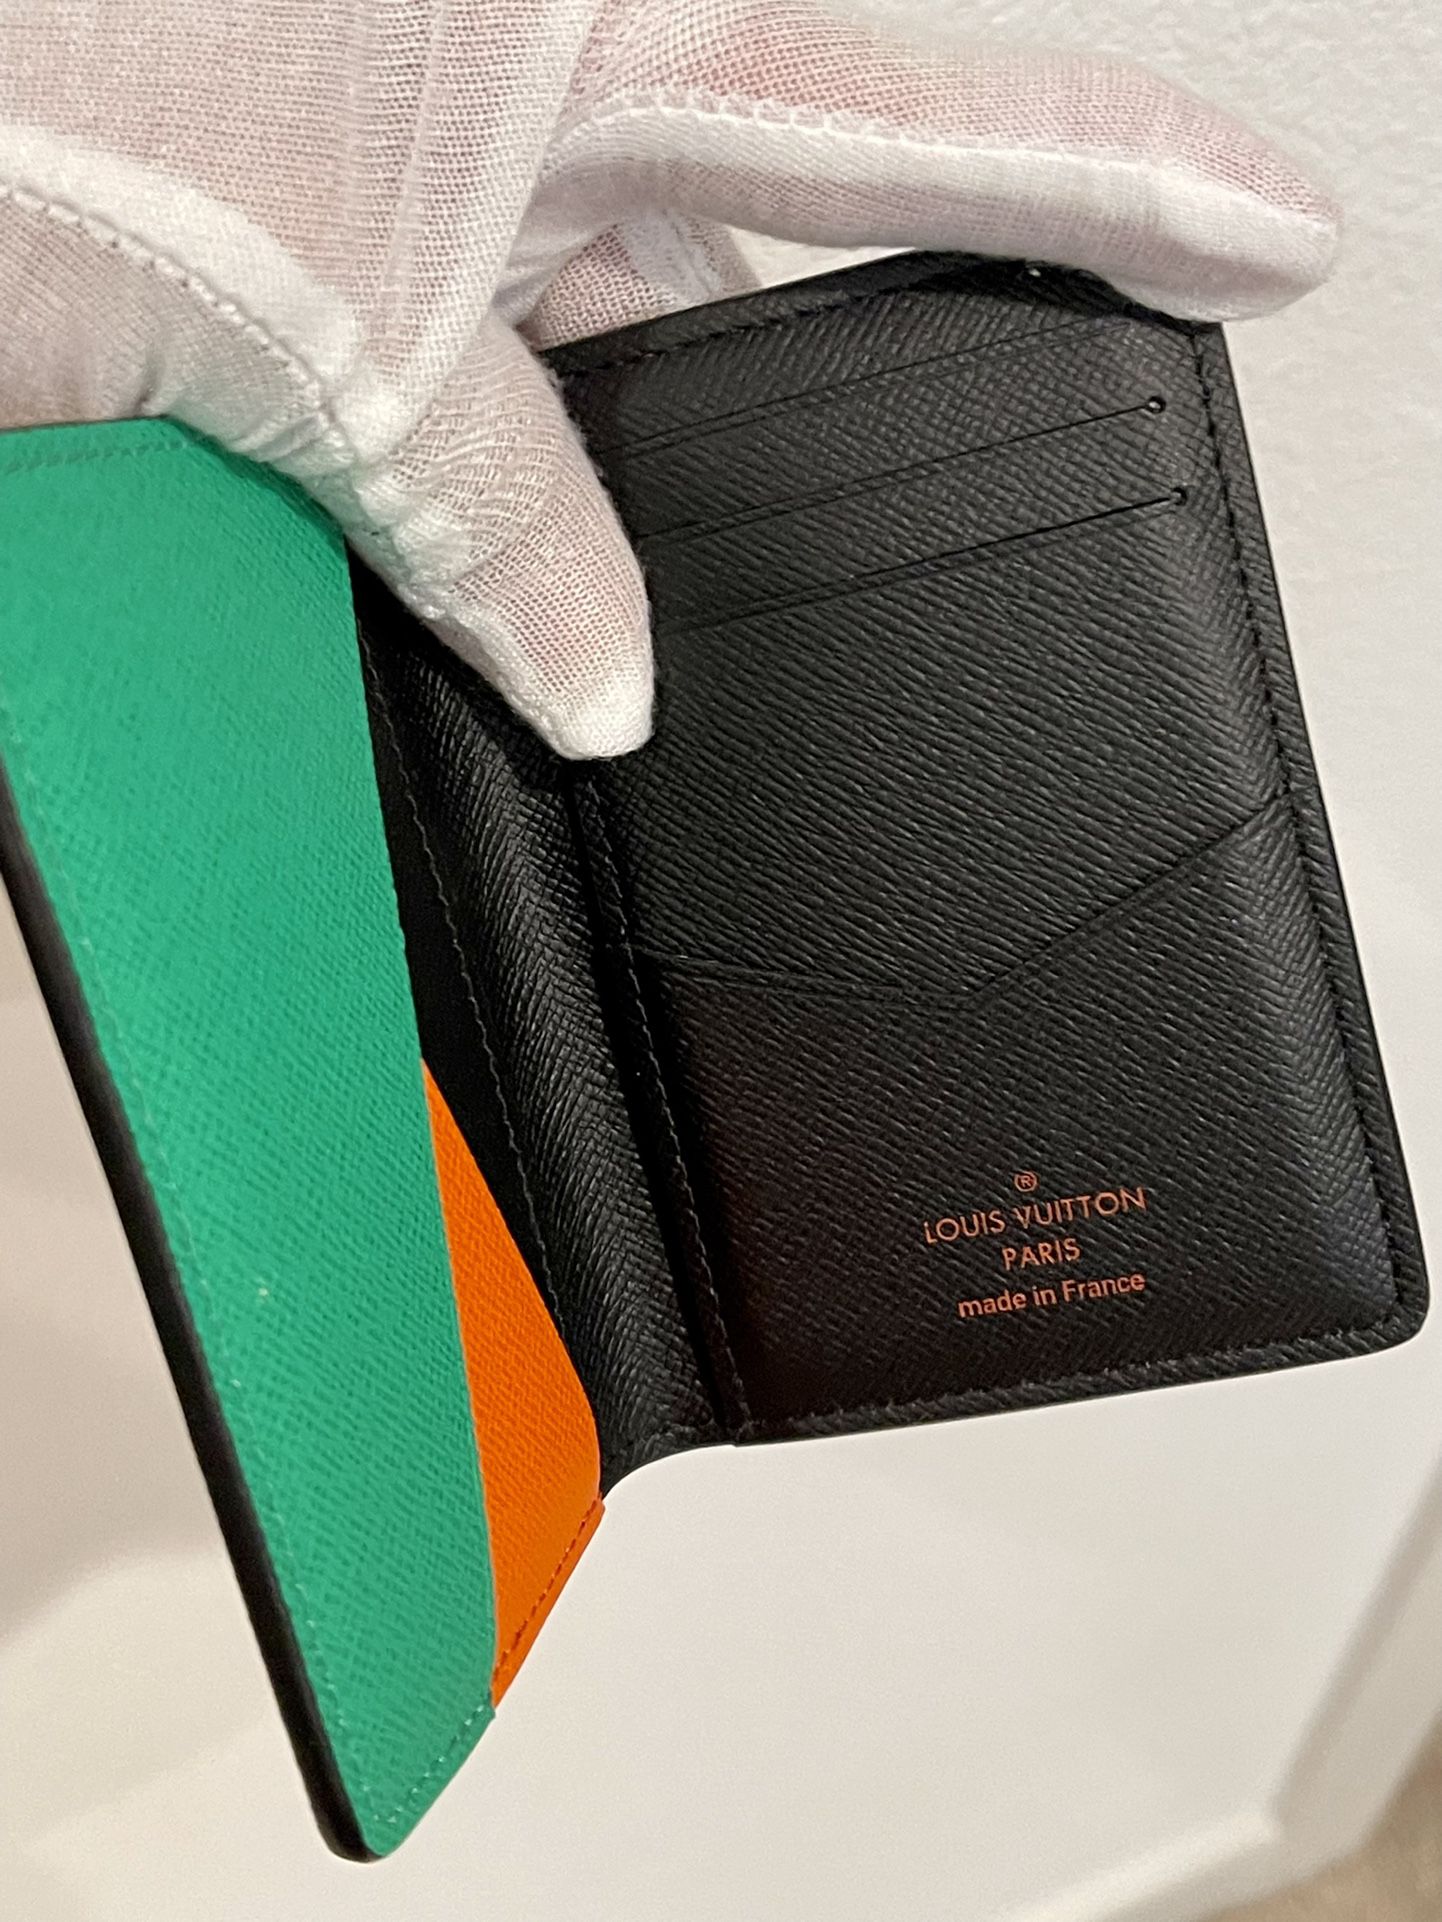 my gf got me this limited edition pocket organizer for our anniversary  while she was in NY! this color combo is a vibe🫡 : r/Louisvuitton